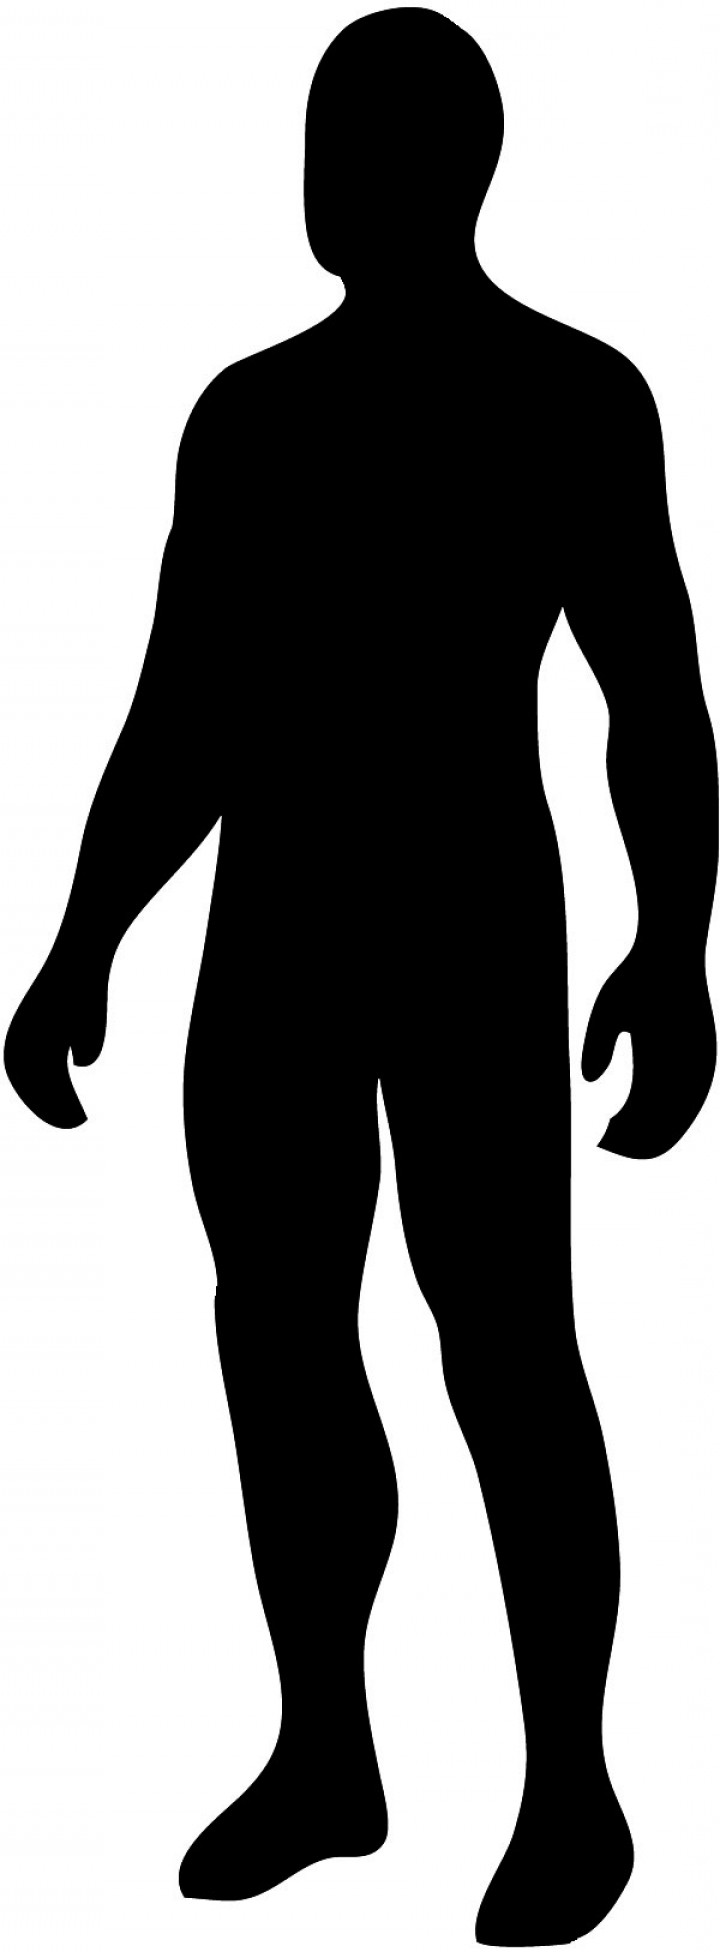 Top Human Silhouette Clip Art Image Clipartidy Clipart Best